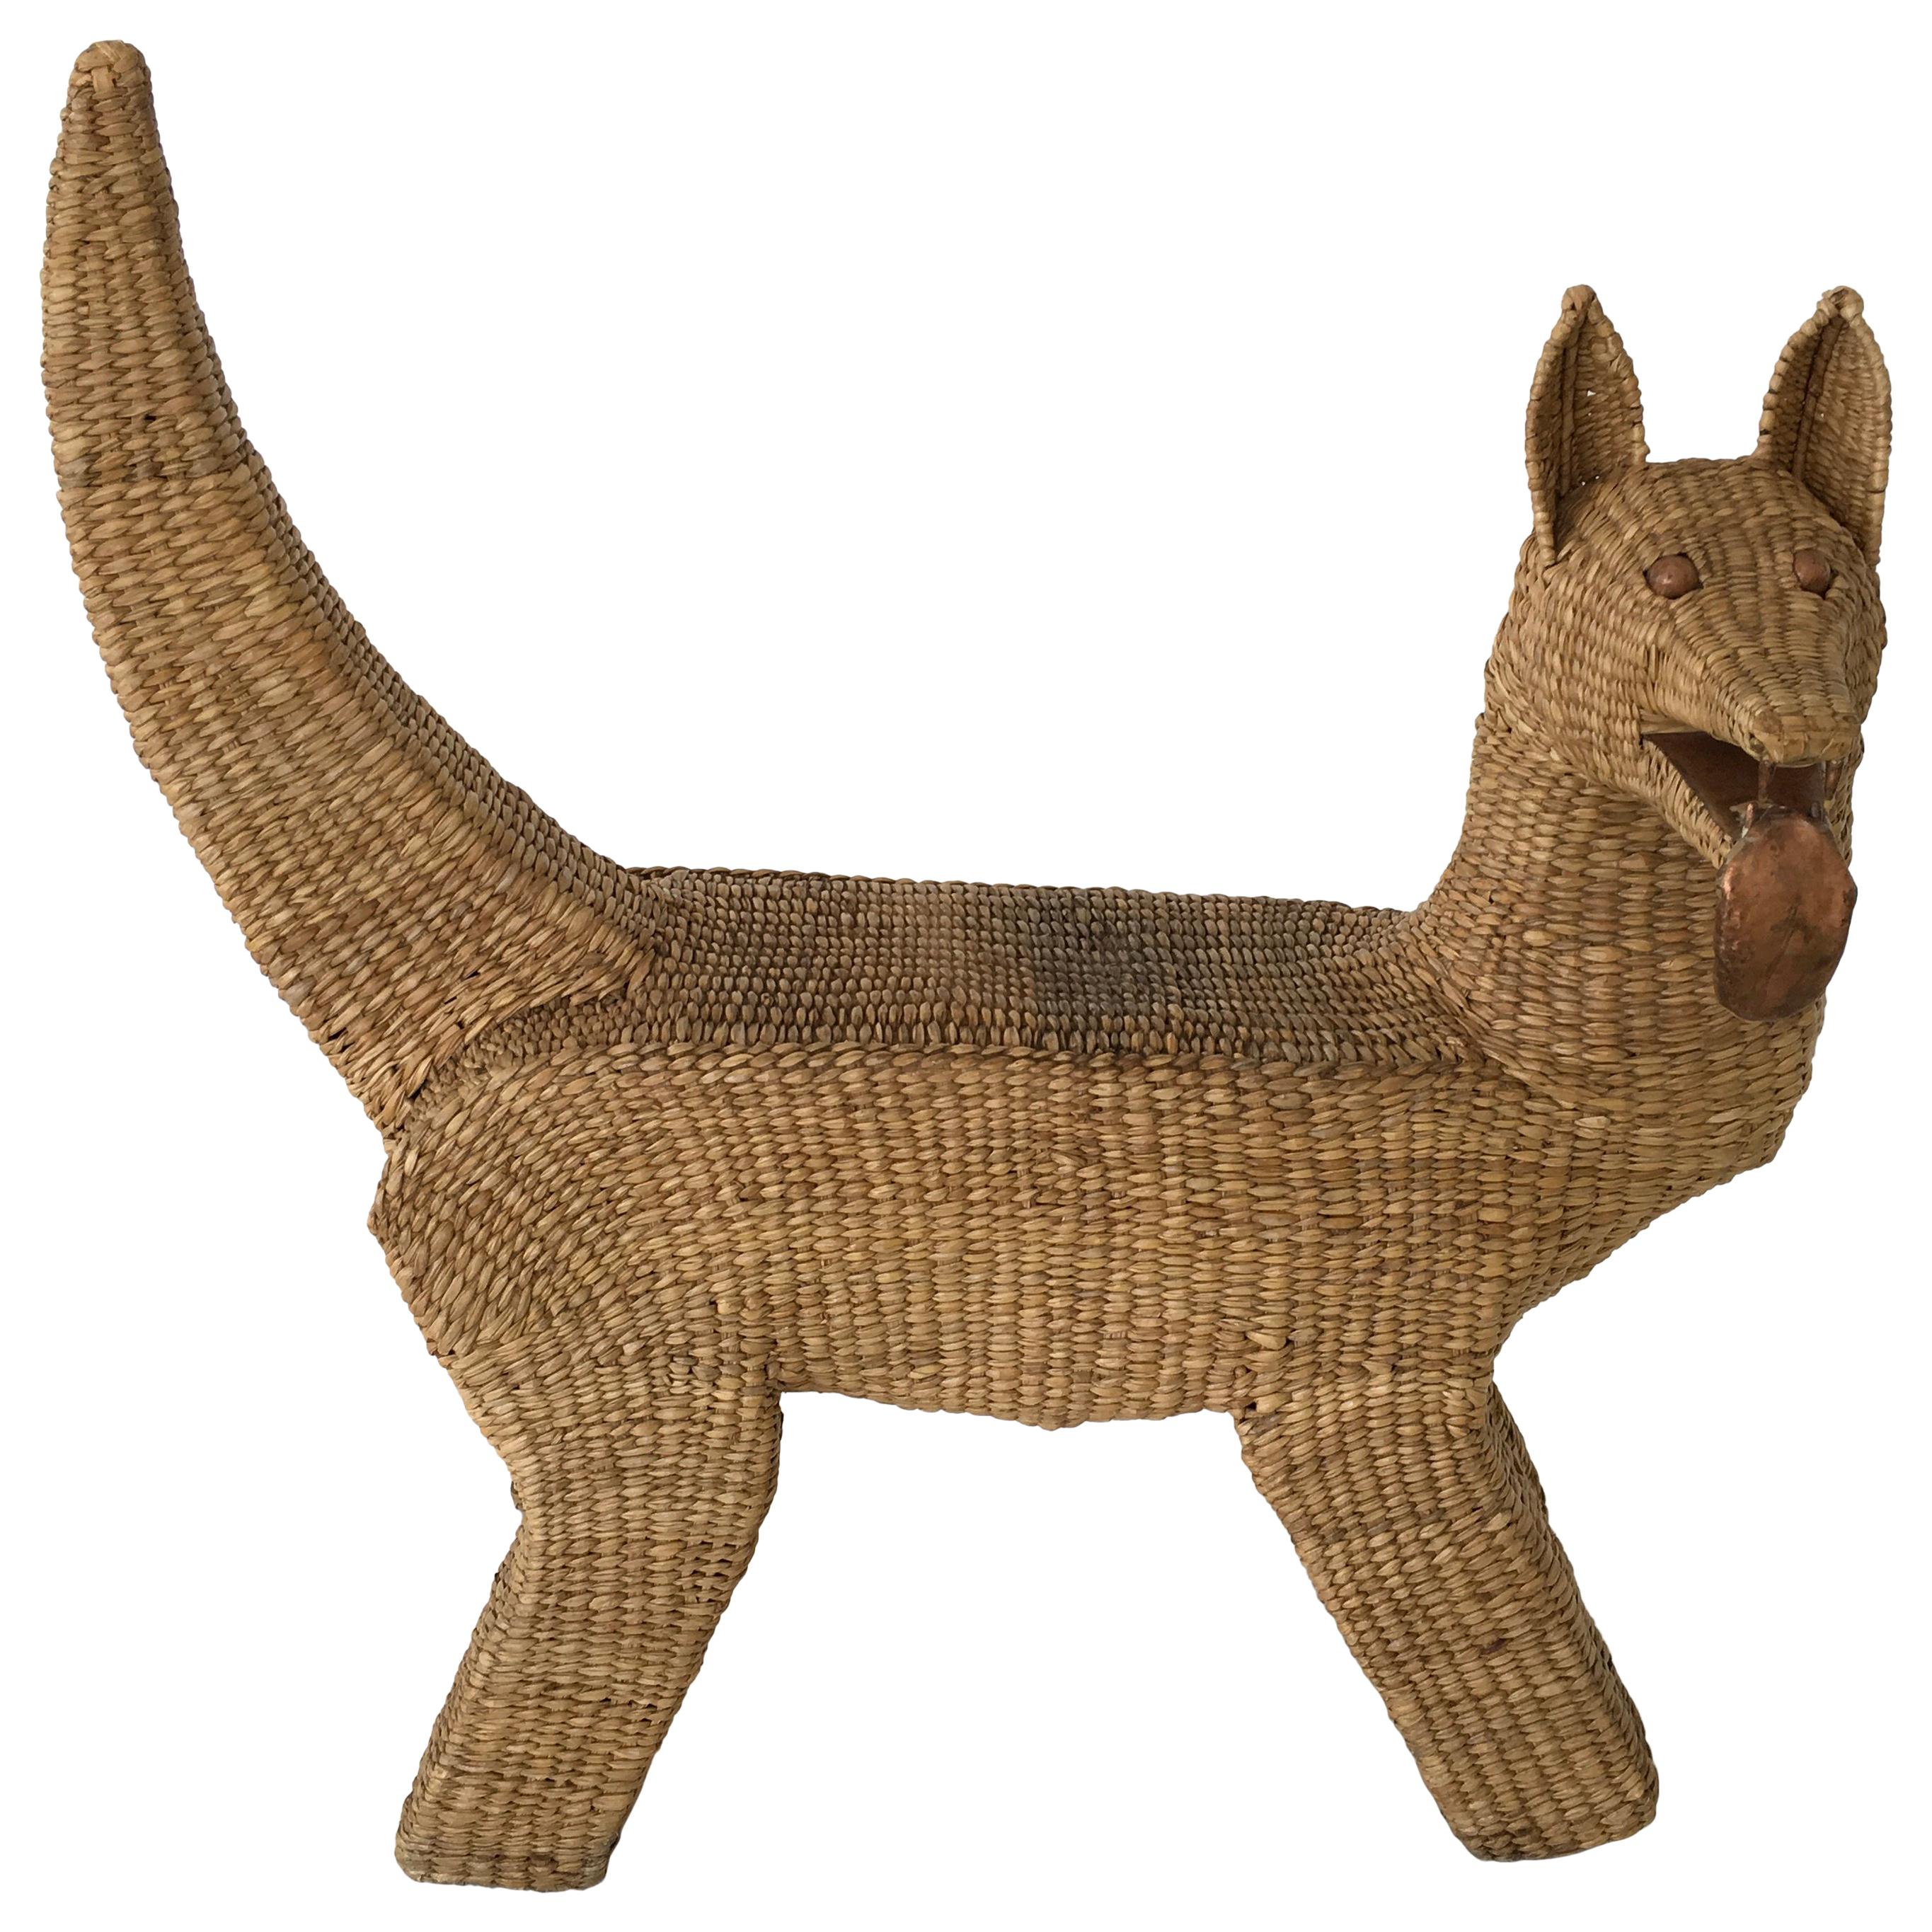 Mario Lopez Torres "Coyote" Bench in Woven Grass For Sale